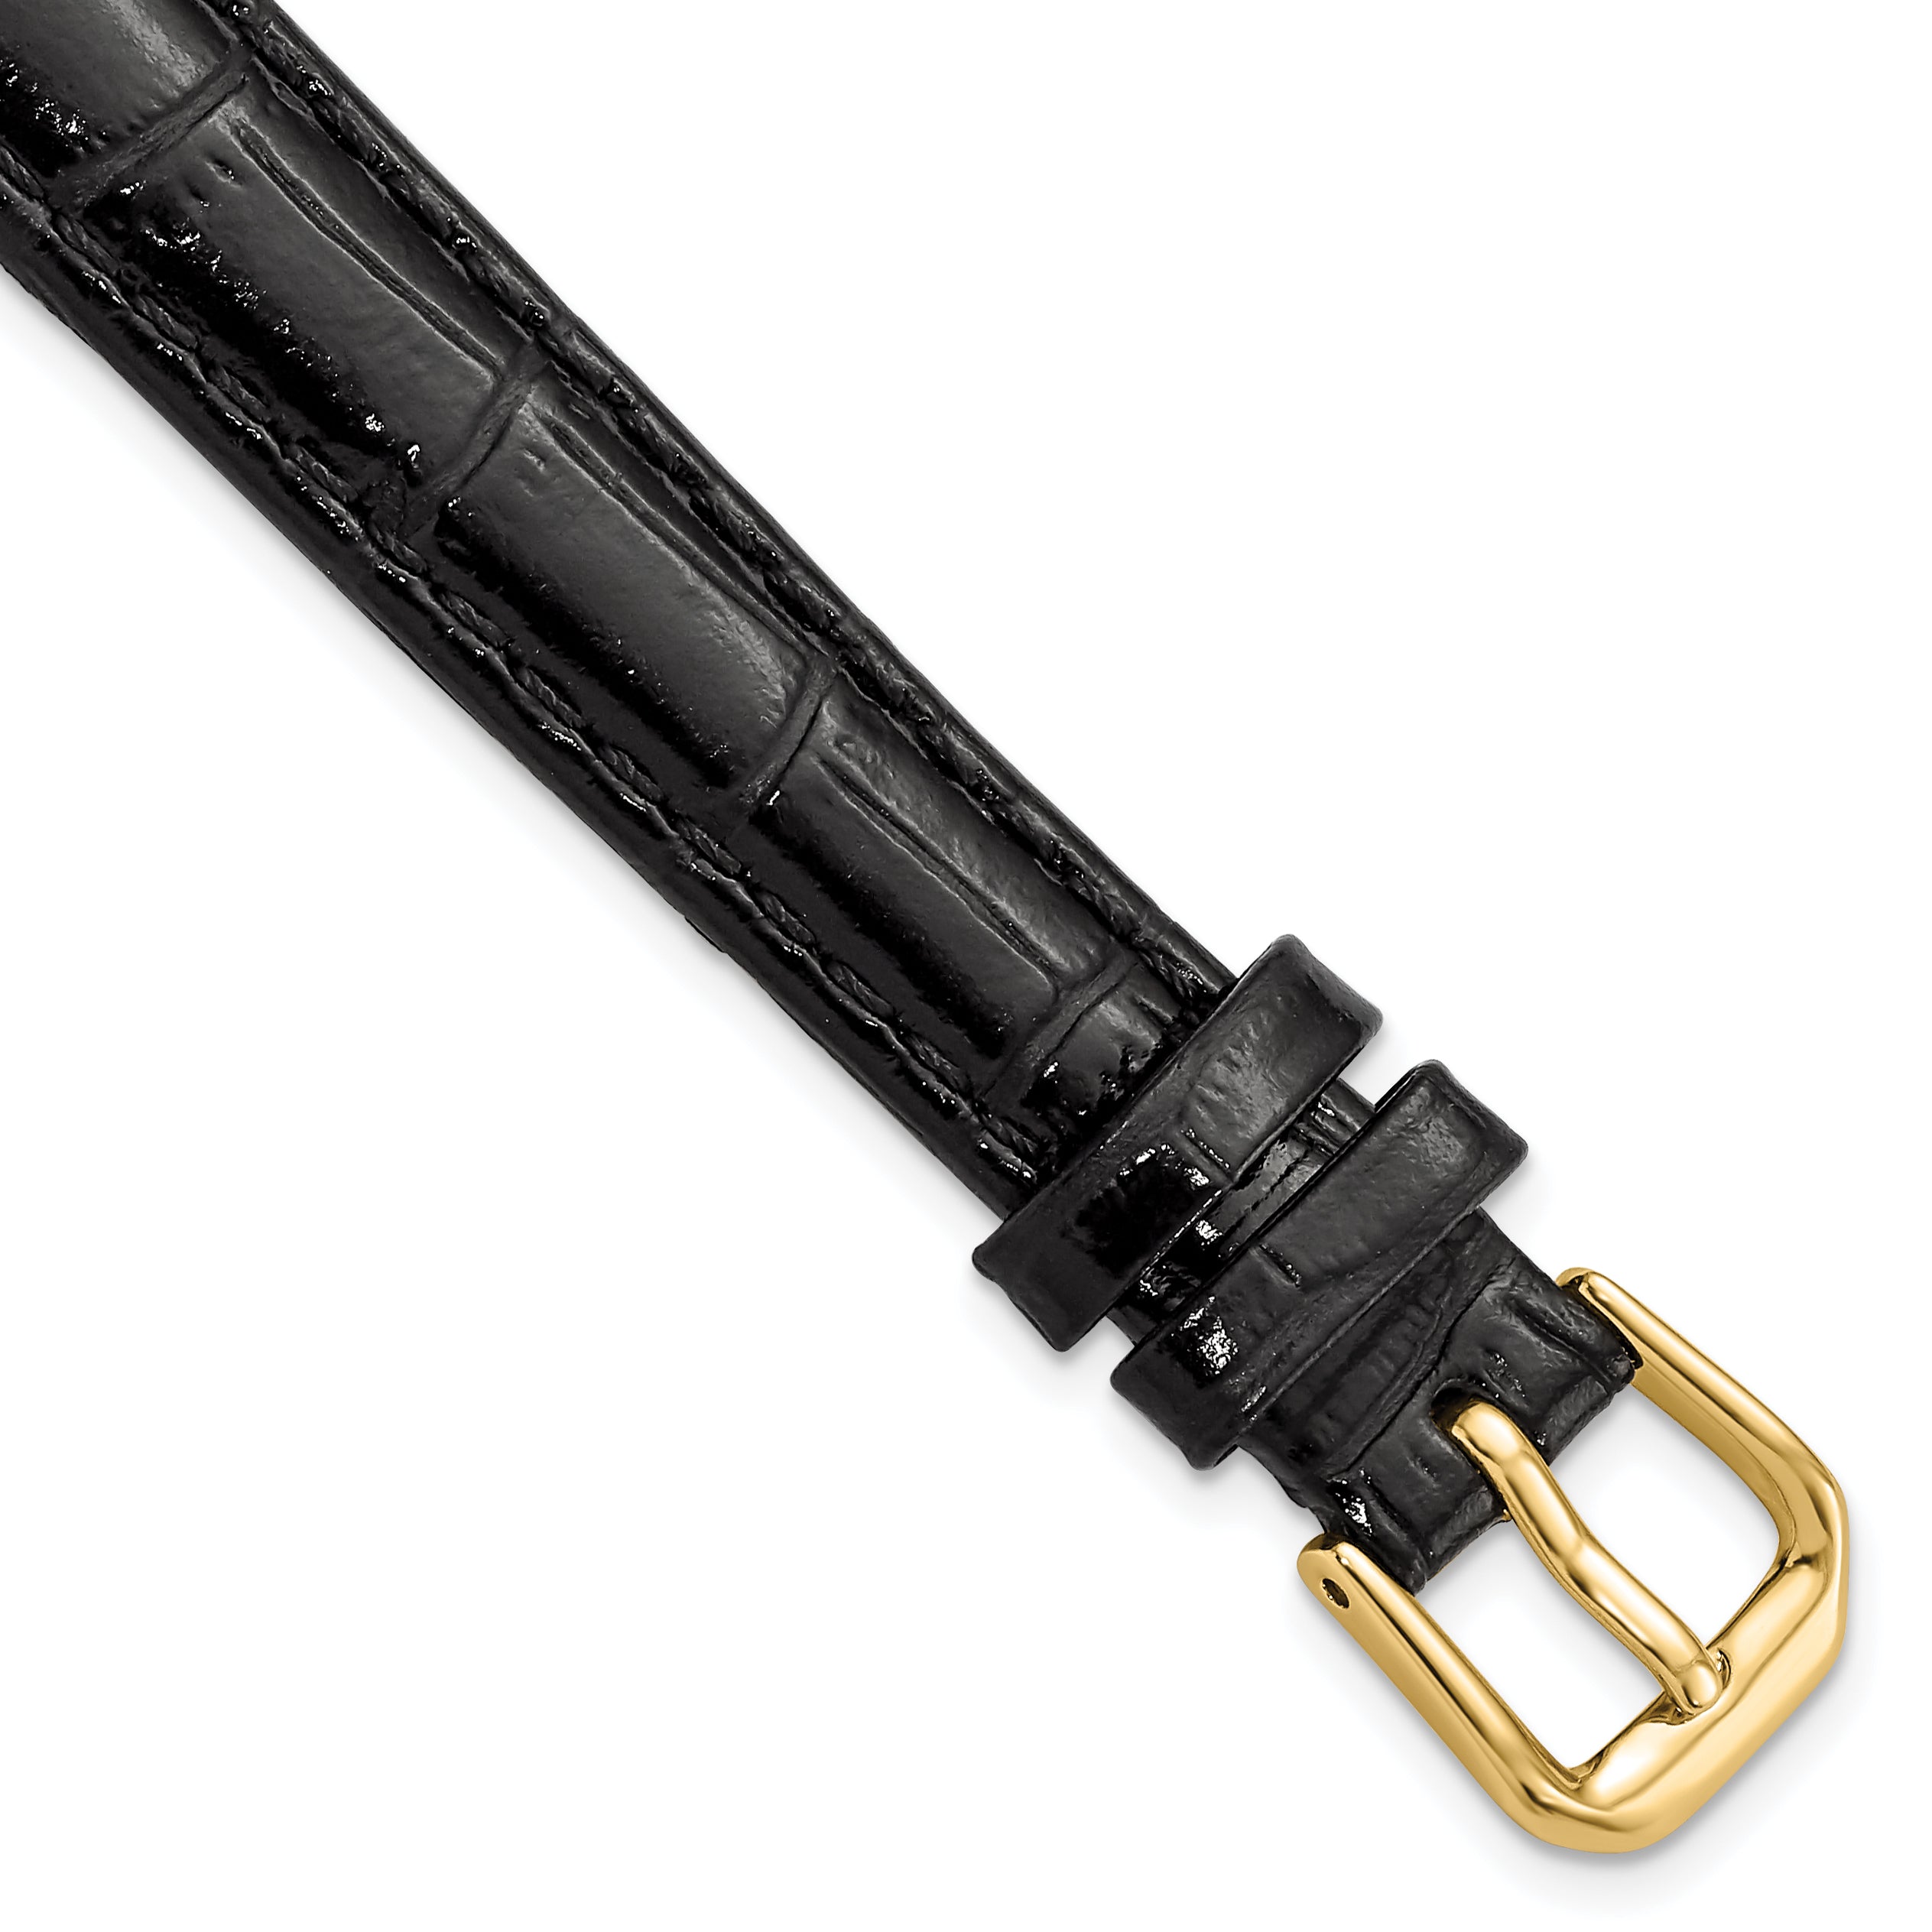 DeBeer 12mm Black Crocodile Grain Leather with Dark Stitching and Gold-tone Buckle 6.75 inch Watch Band